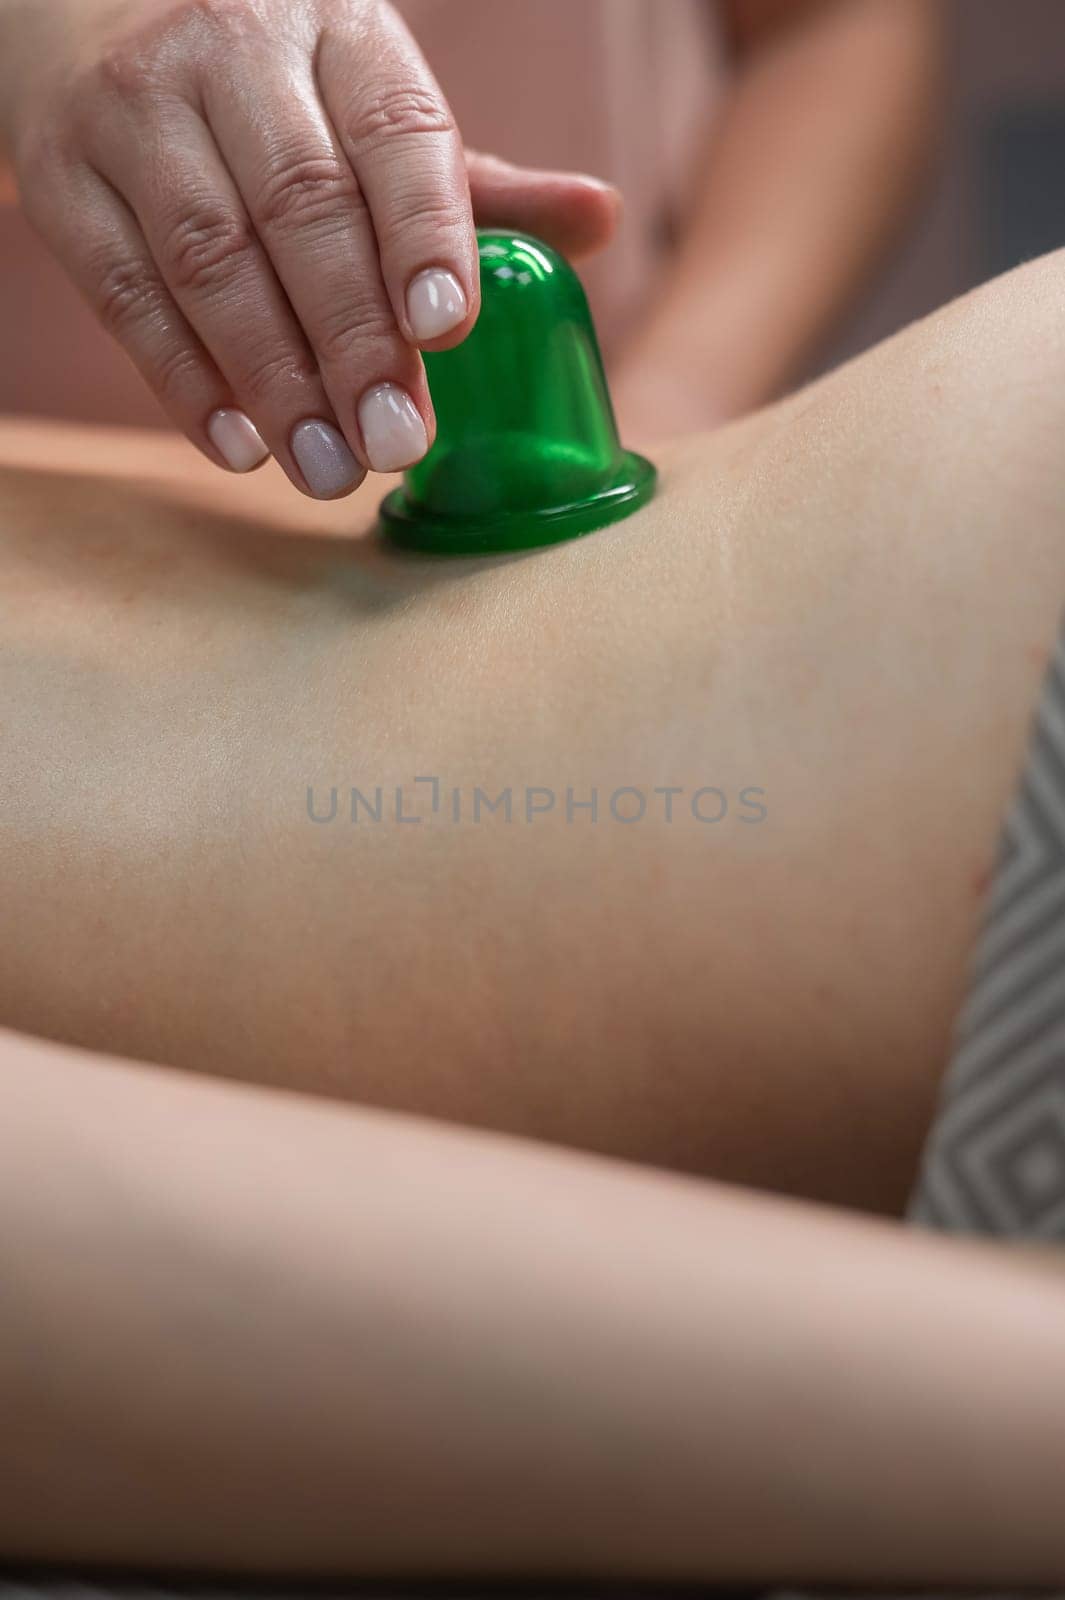 A woman undergoes an anti-cellulite massage procedure using a vacuum jar. Close-up of the lower back. Vertical photo